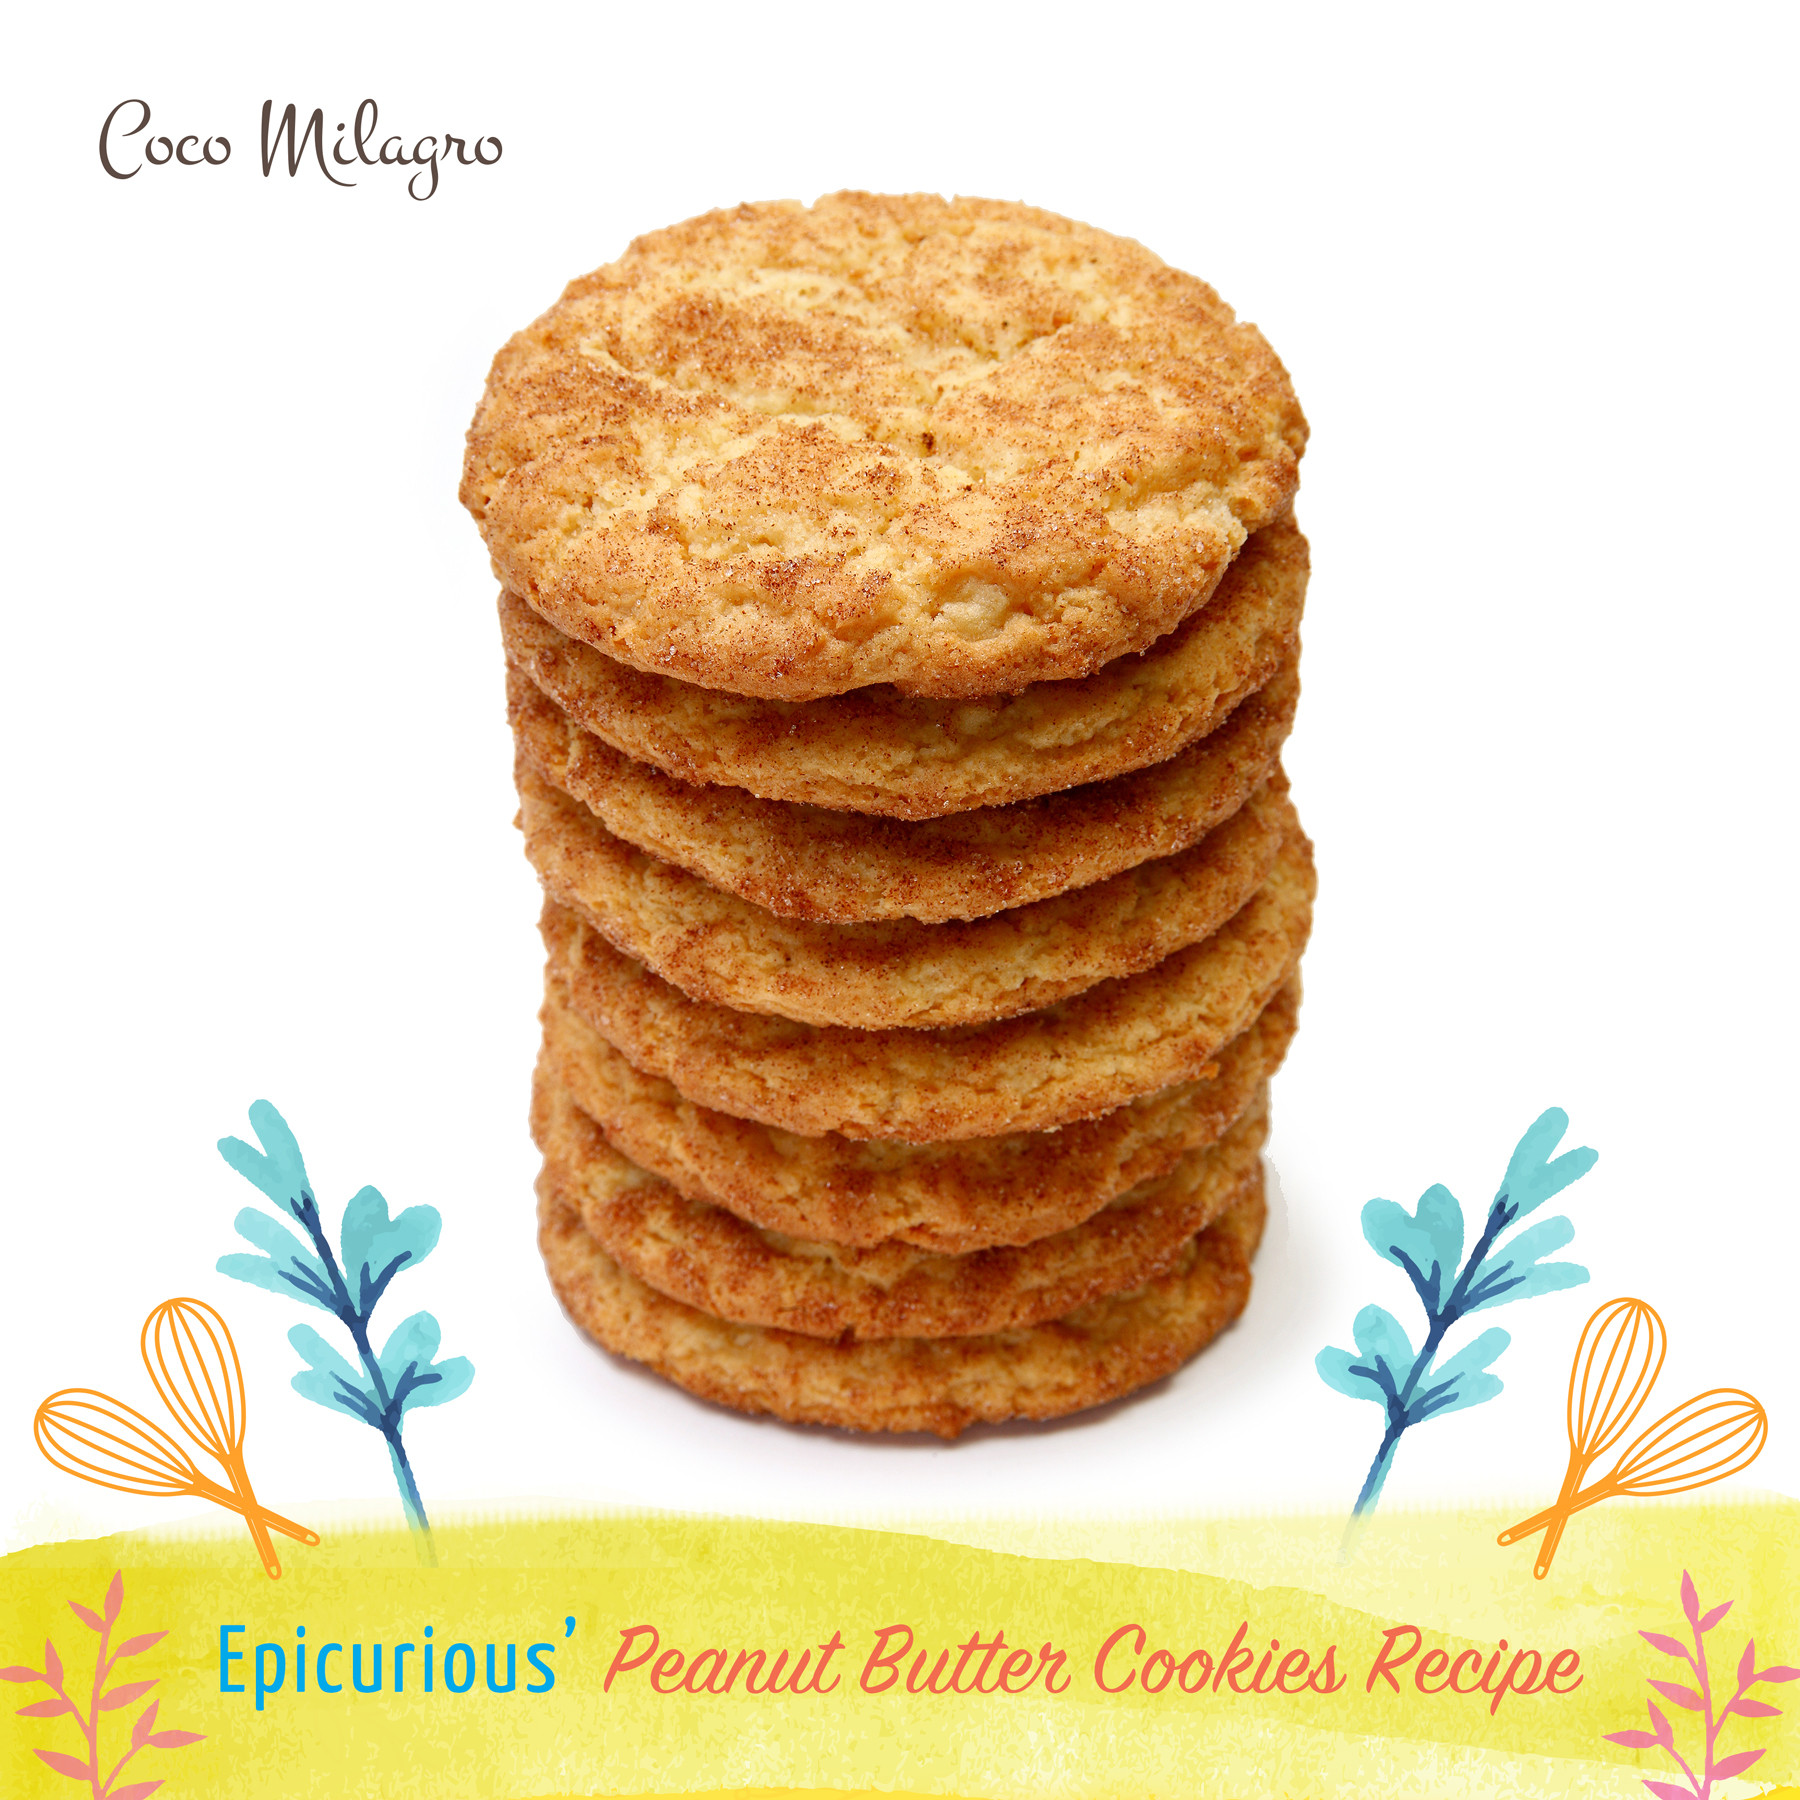 Coconut Oil Peanut Butter Cookies
 Coco Milagro EVCO – Epicurious Peanut Butter Cookies with